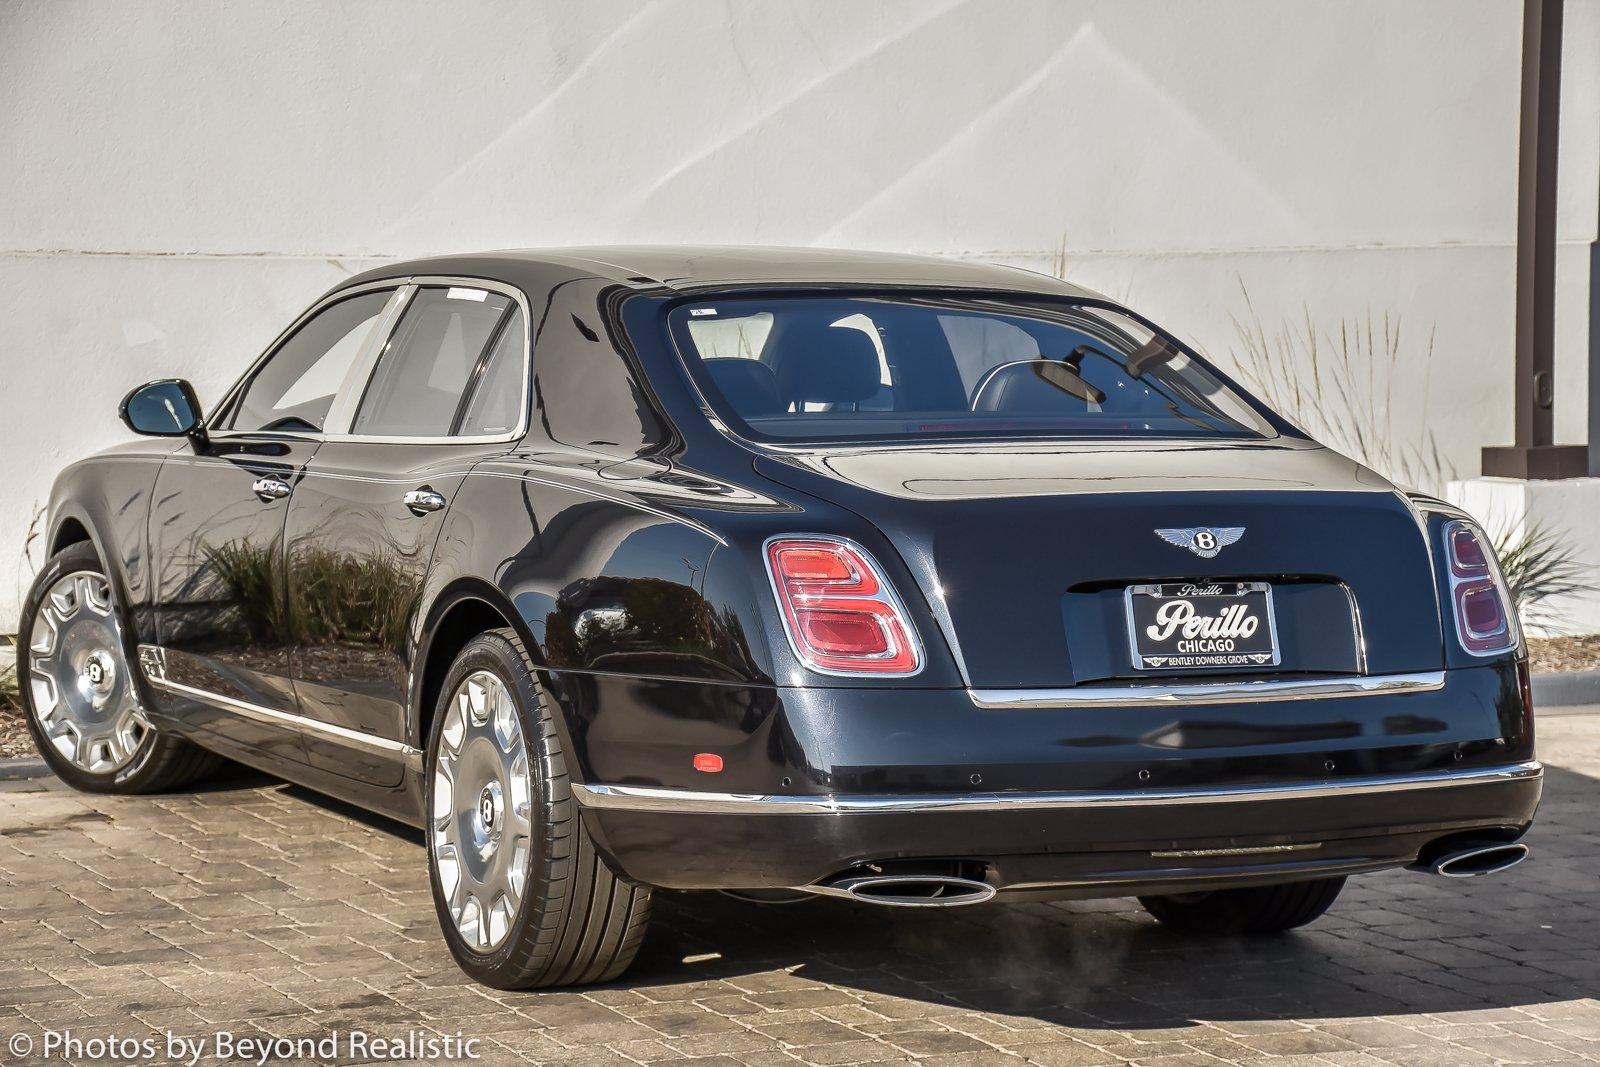 Used 2017 Bentley Mulsanne  | Downers Grove, IL